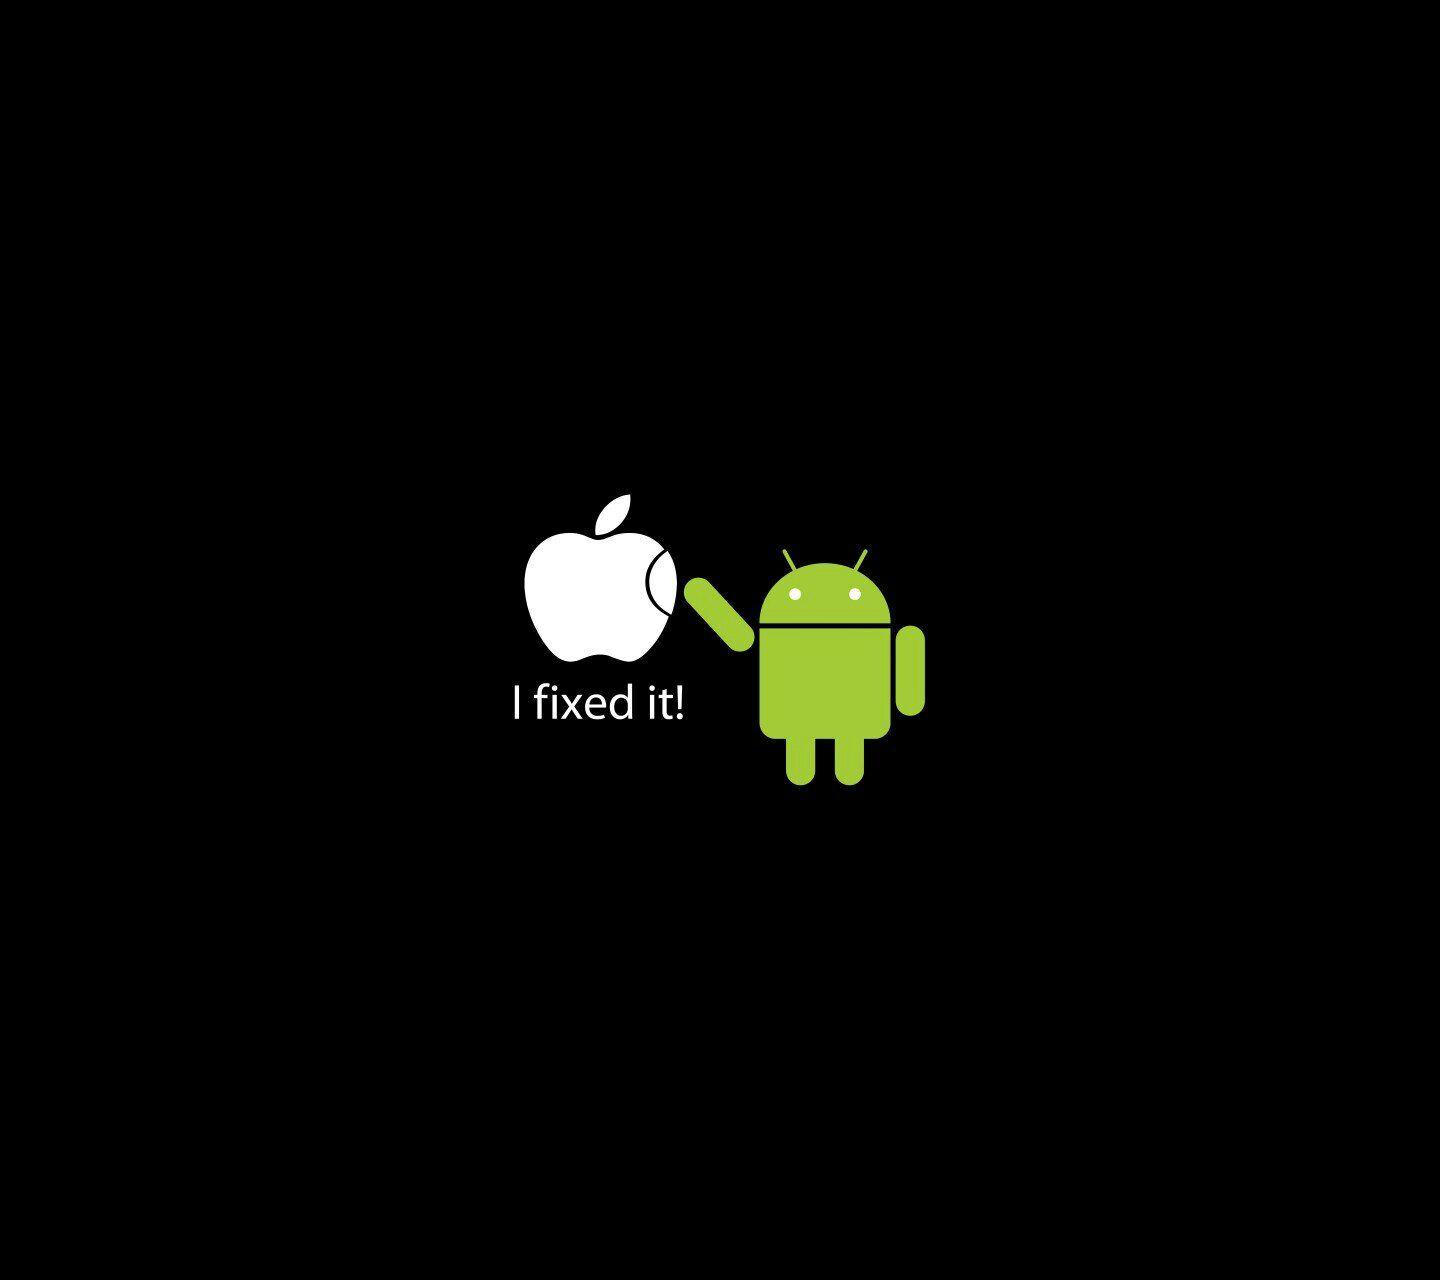 android funny wallpaper